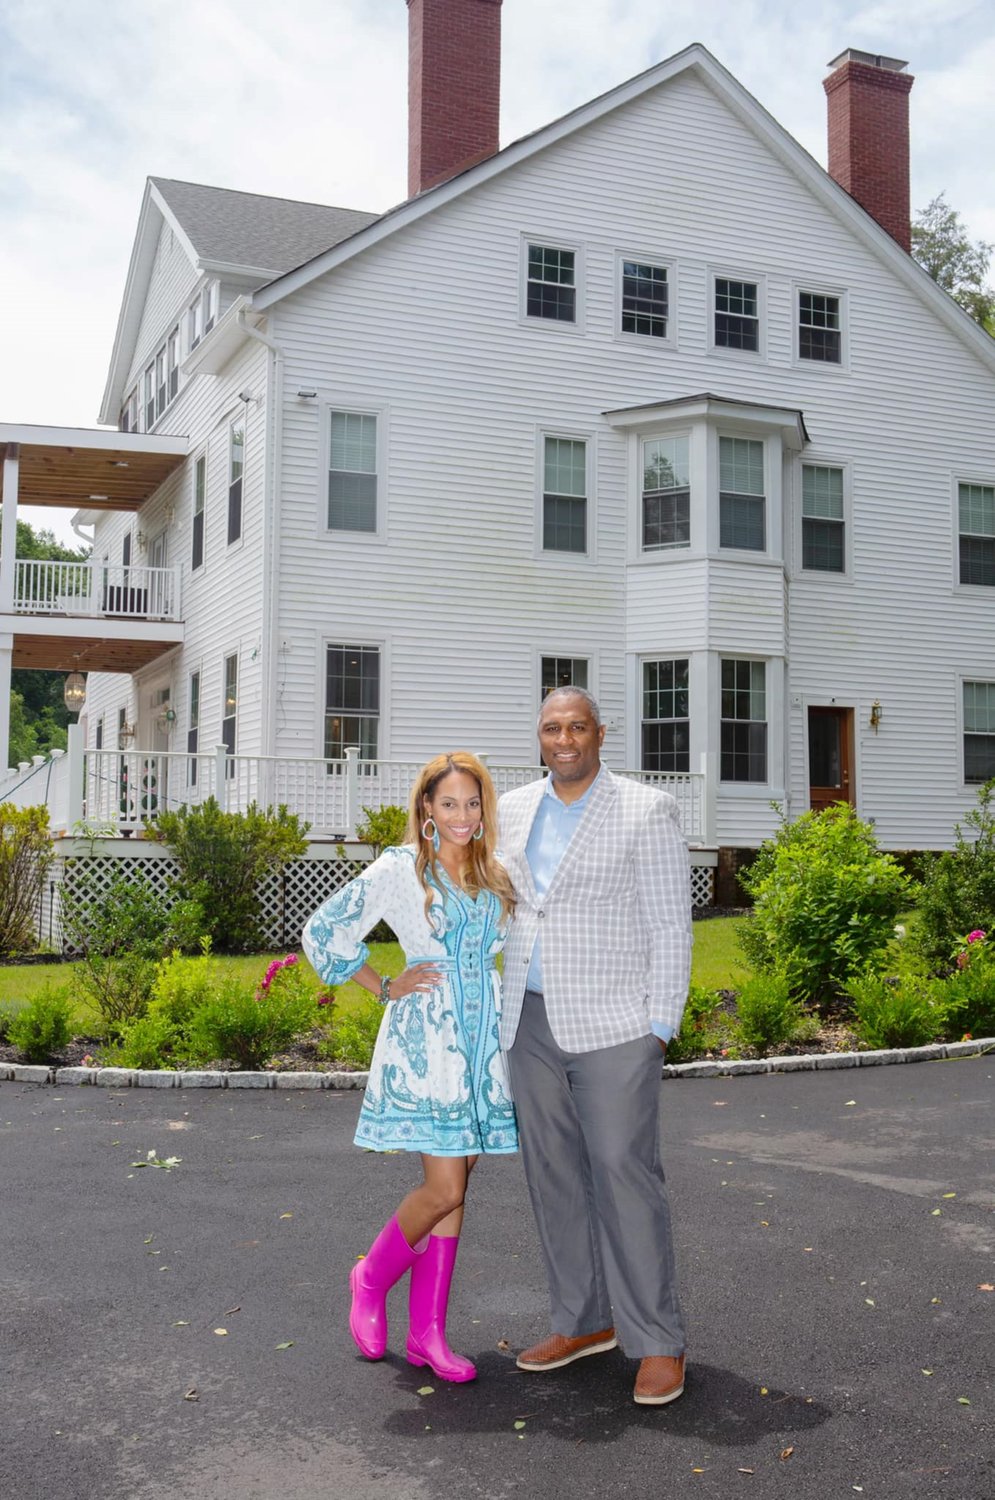 Although it has taken a great deal of time and effort on the part of, Jaime, left, and her husband Frantz, the reward has been seeing the space come to life in front of them as they raise their family and learn more about their home’s unique history.